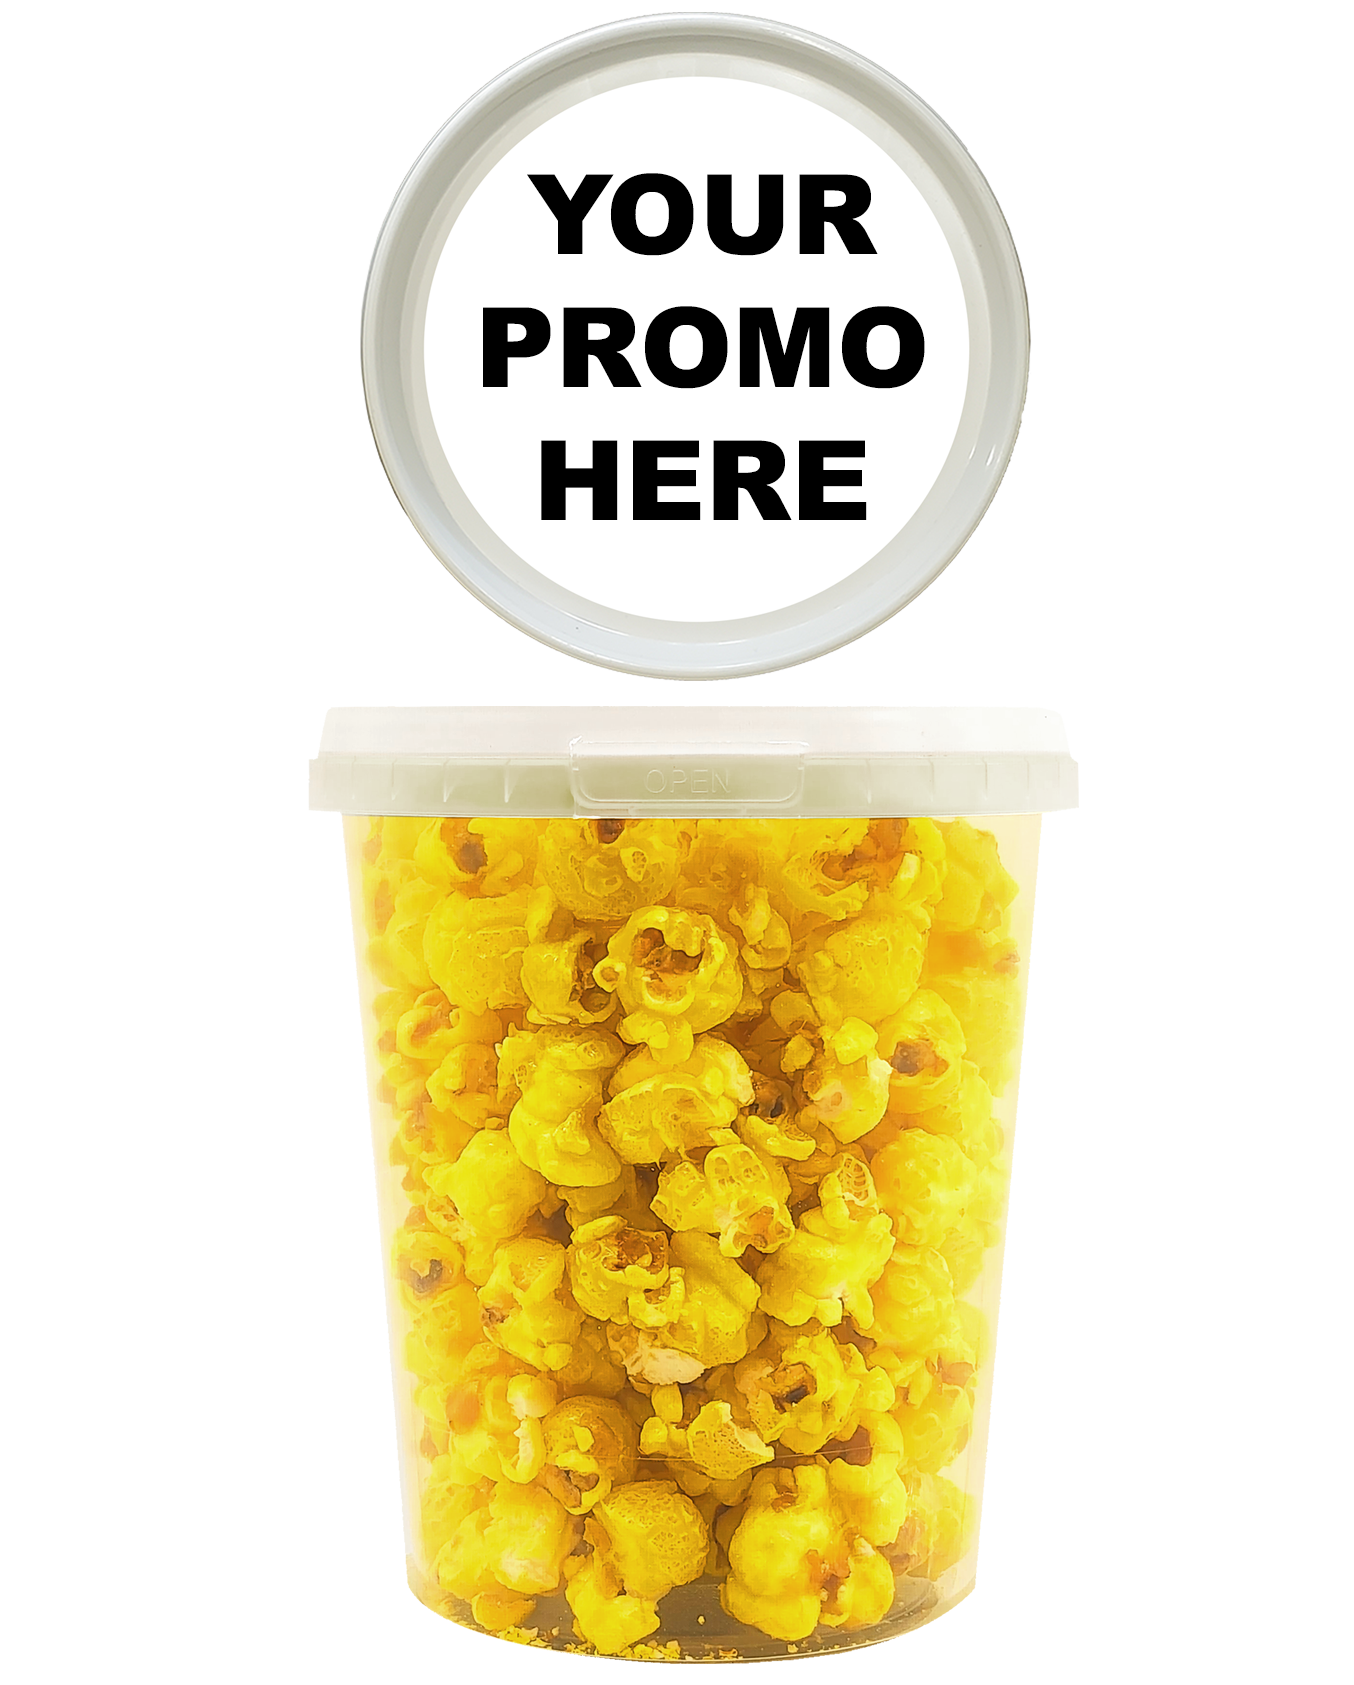 Promo Pop™ - Lively Lemon Classic (as low as $4.99 per bucket) Case of 12 Price